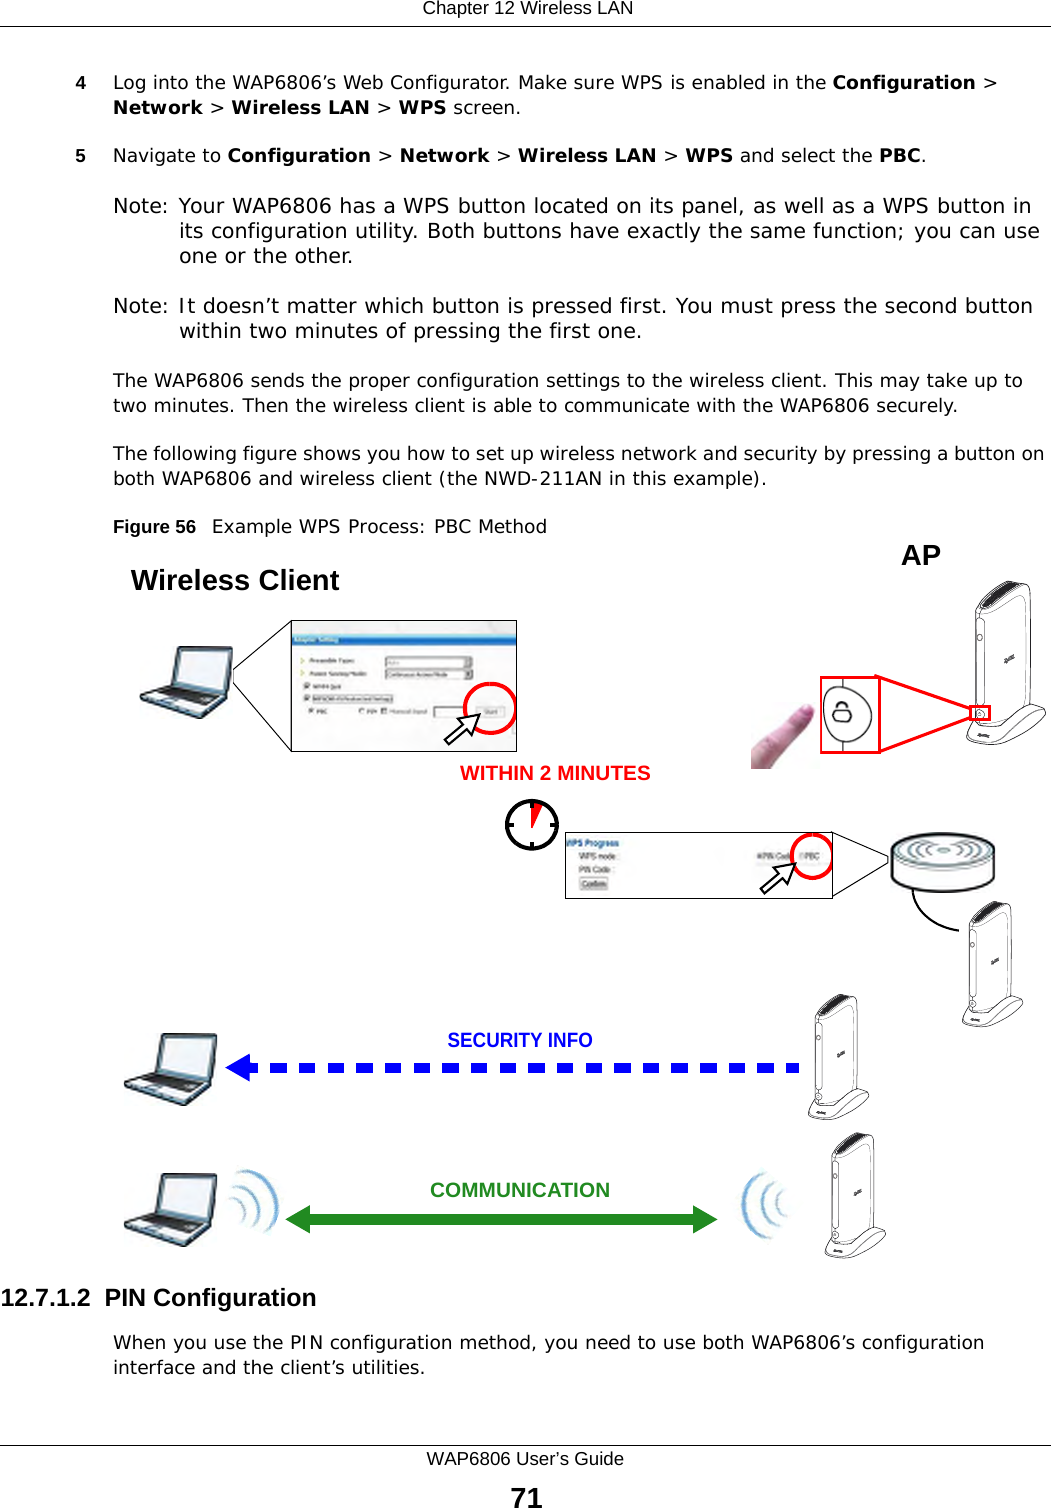  Chapter 12 Wireless LANWAP6806 User’s Guide714Log into the WAP6806’s Web Configurator. Make sure WPS is enabled in the Configuration &gt; Network &gt; Wireless LAN &gt; WPS screen. 5Navigate to Configuration &gt; Network &gt; Wireless LAN &gt; WPS and select the PBC.Note: Your WAP6806 has a WPS button located on its panel, as well as a WPS button in its configuration utility. Both buttons have exactly the same function; you can use one or the other.Note: It doesn’t matter which button is pressed first. You must press the second button within two minutes of pressing the first one. The WAP6806 sends the proper configuration settings to the wireless client. This may take up to two minutes. Then the wireless client is able to communicate with the WAP6806 securely. The following figure shows you how to set up wireless network and security by pressing a button on both WAP6806 and wireless client (the NWD-211AN in this example).Figure 56   Example WPS Process: PBC Method12.7.1.2  PIN ConfigurationWhen you use the PIN configuration method, you need to use both WAP6806’s configuration interface and the client’s utilities.Wireless Client    SECURITY INFOCOMMUNICATIONWITHIN 2 MINUTESAP